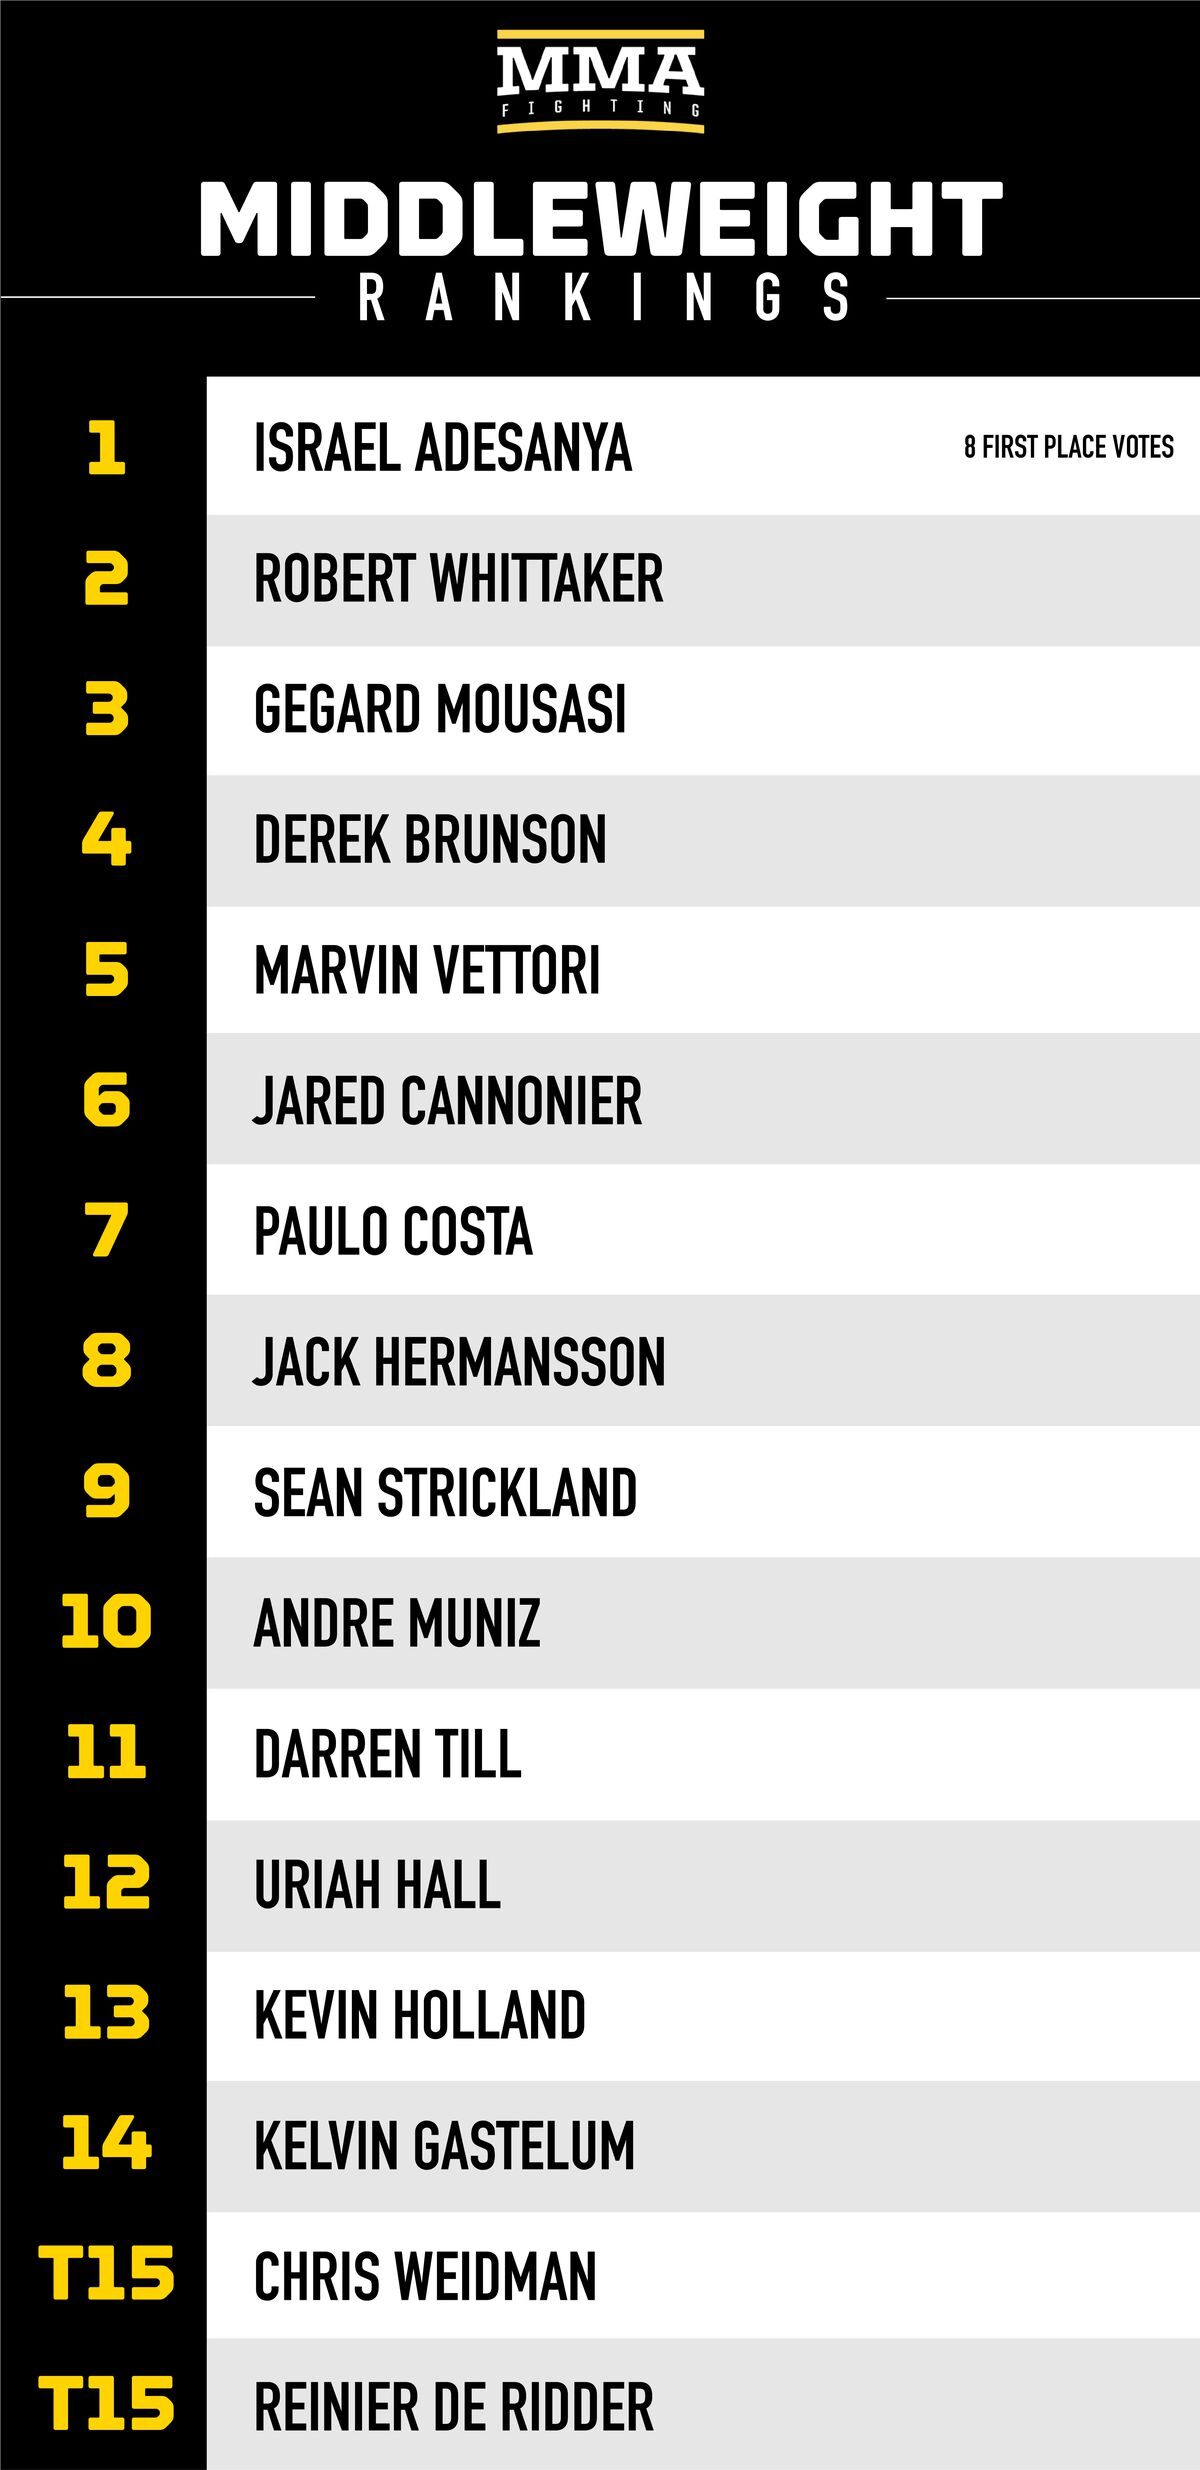 mmaf_rankings_middleweight